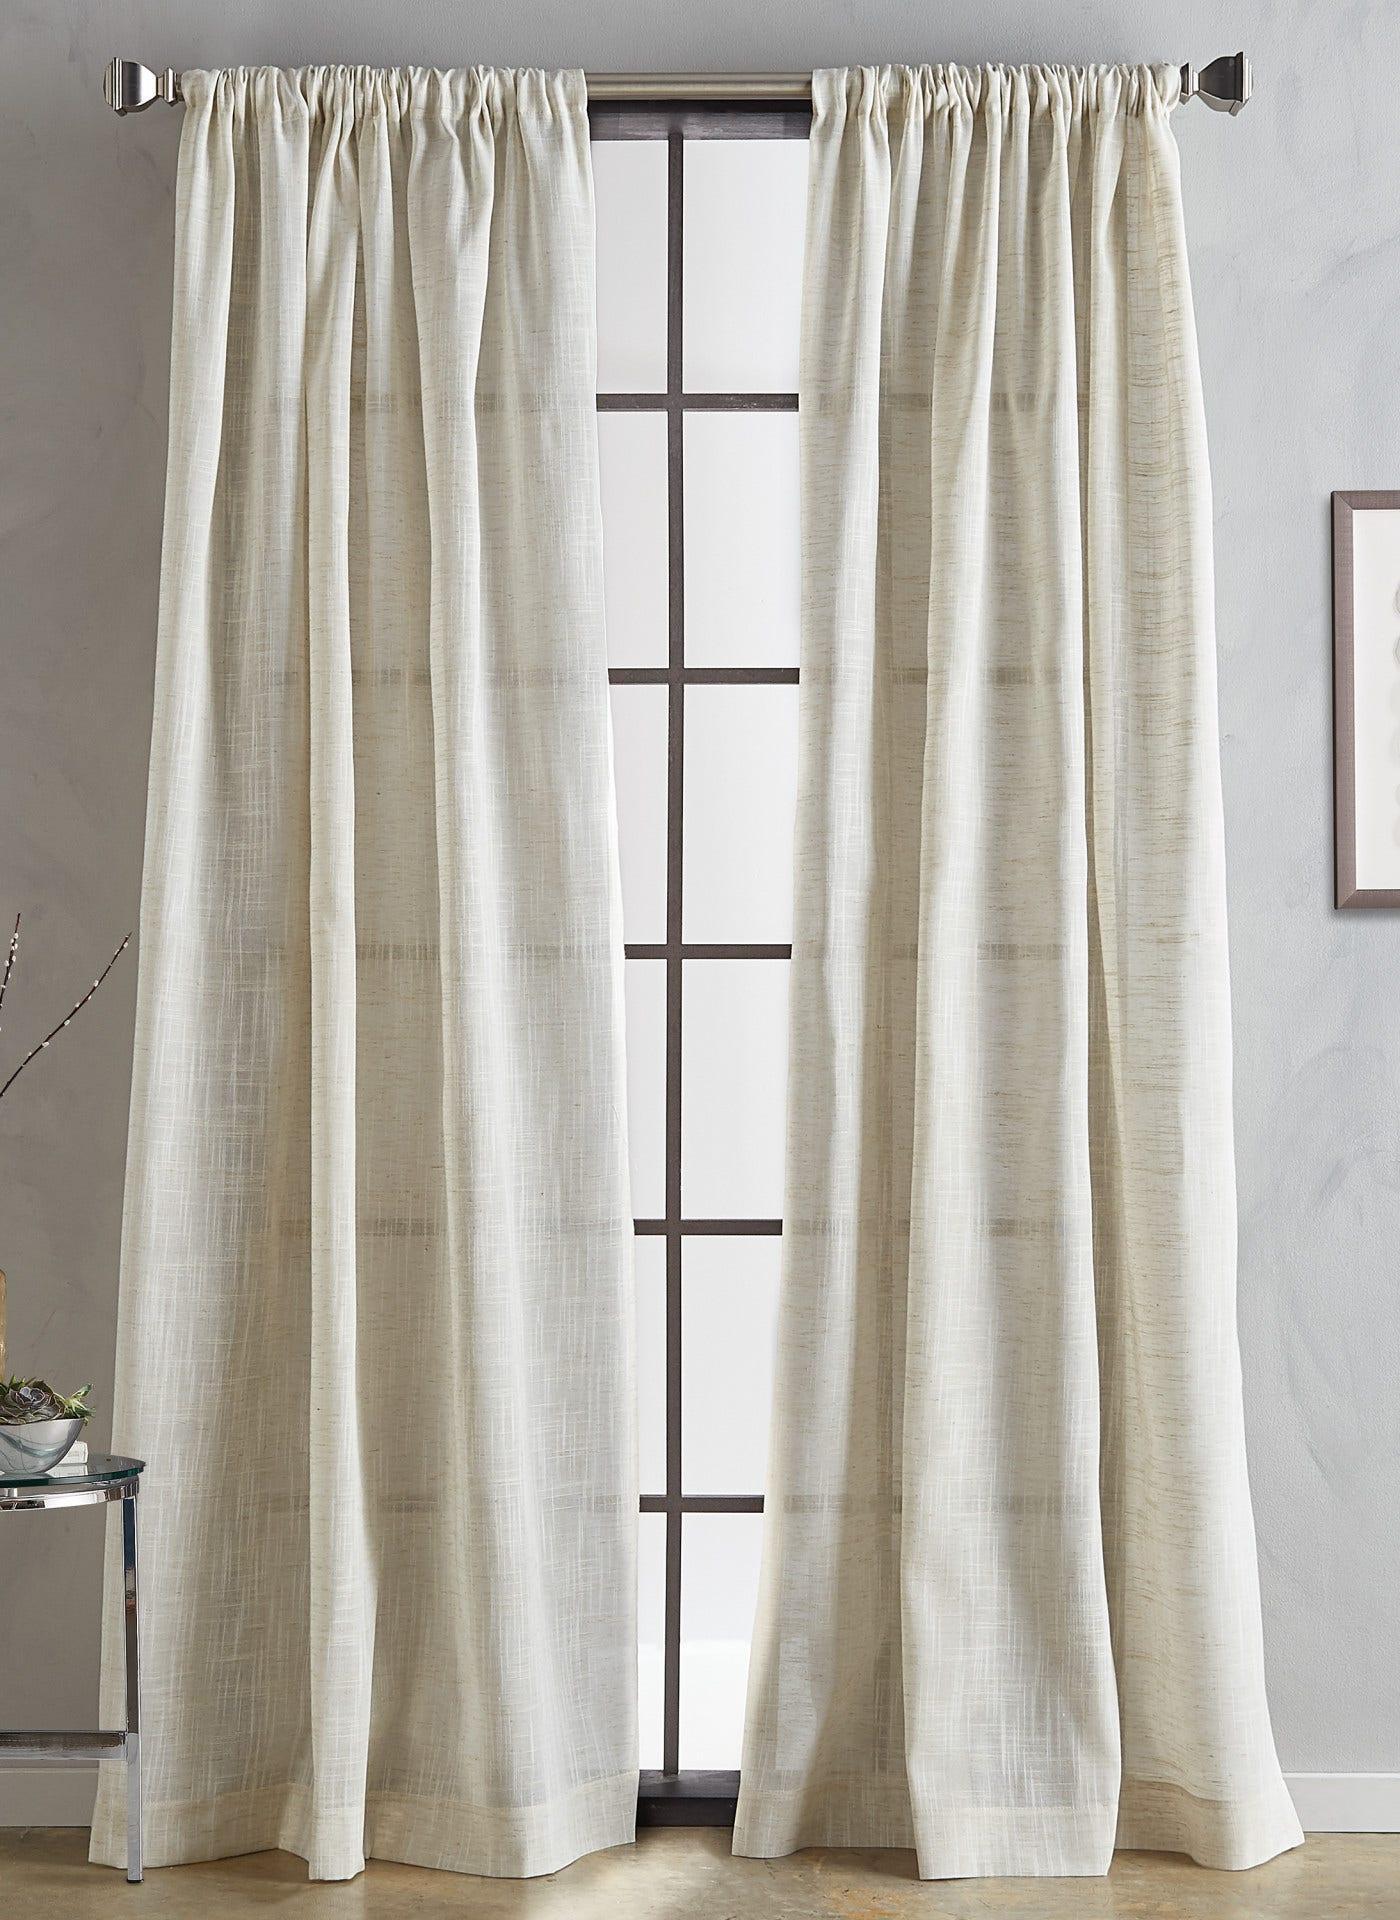 DKNY Classic Linen Natural Window Panel Curtains in Beige Size 50 X 84